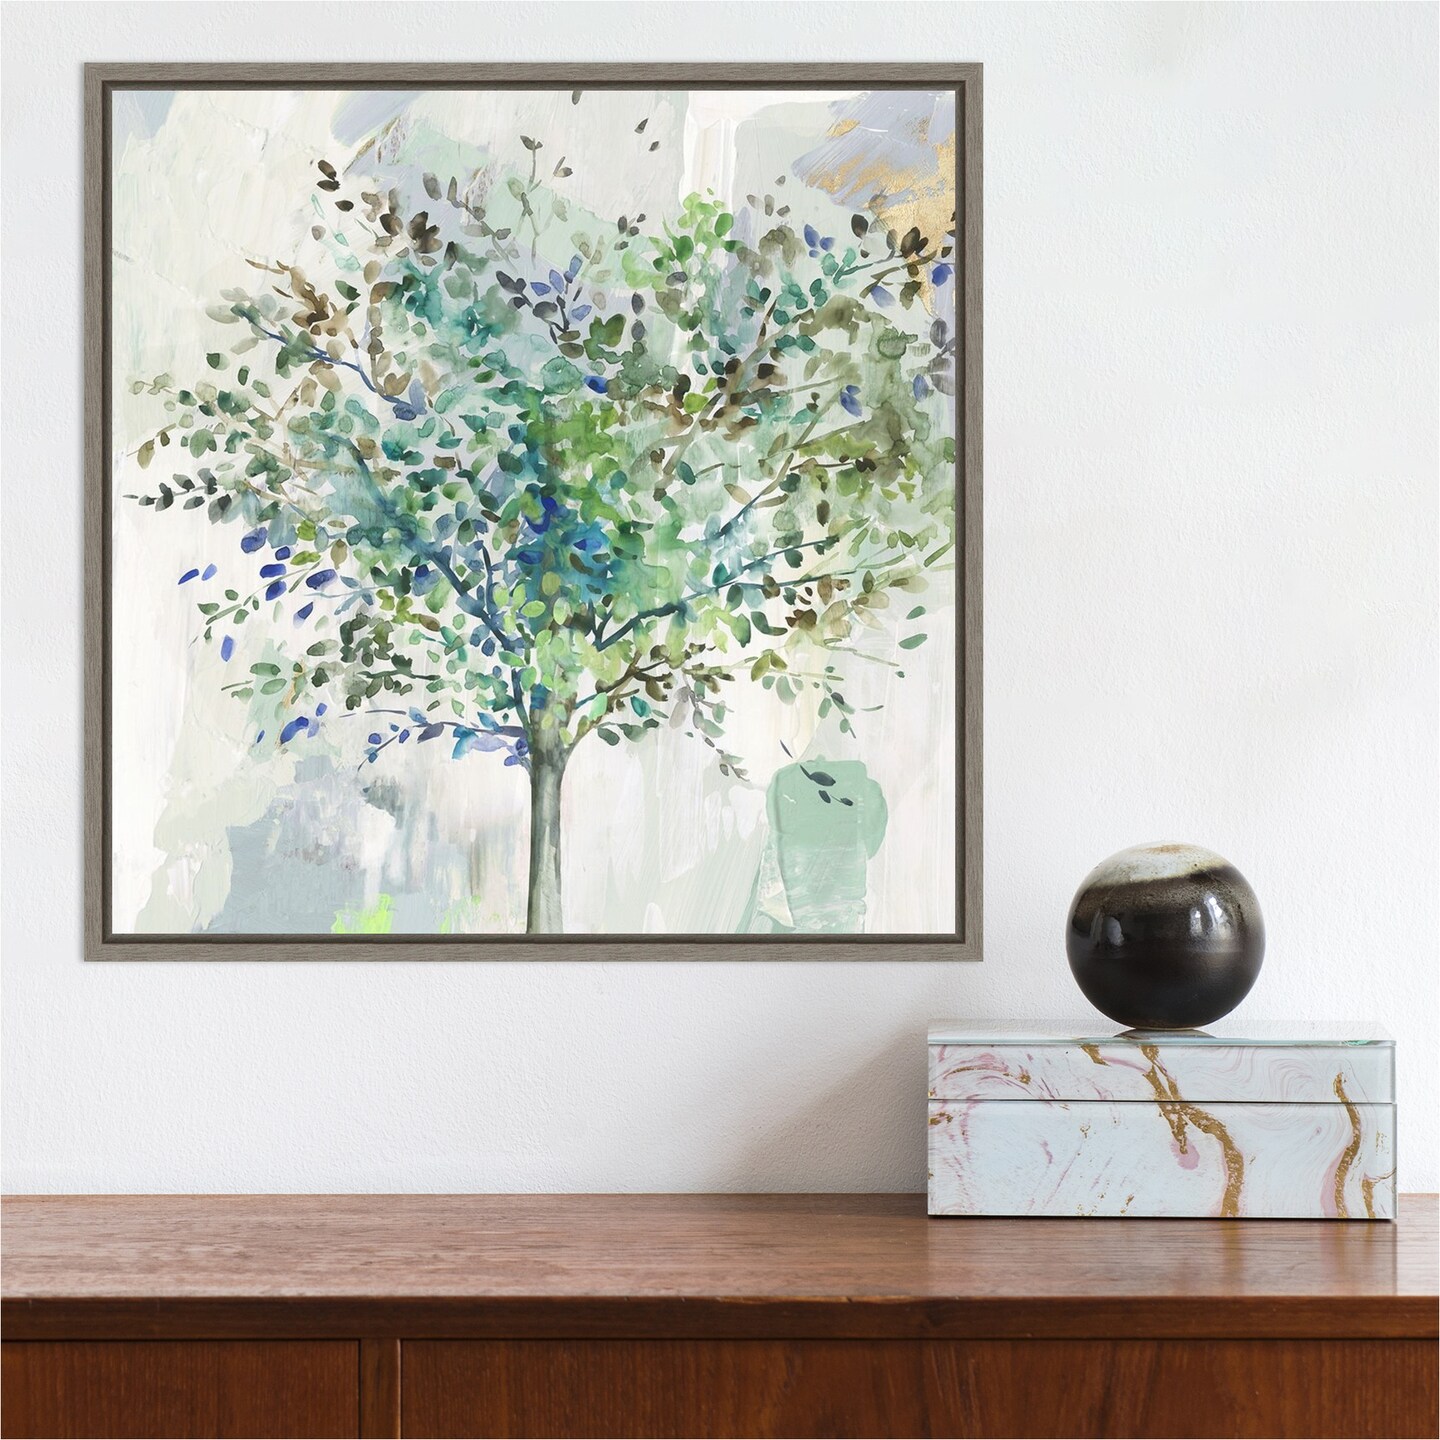 Glorious Still Moment (Green Tree) by Allison Pearce 16-in. W x 16-in. H. Canvas Wall Art Print Framed in Grey